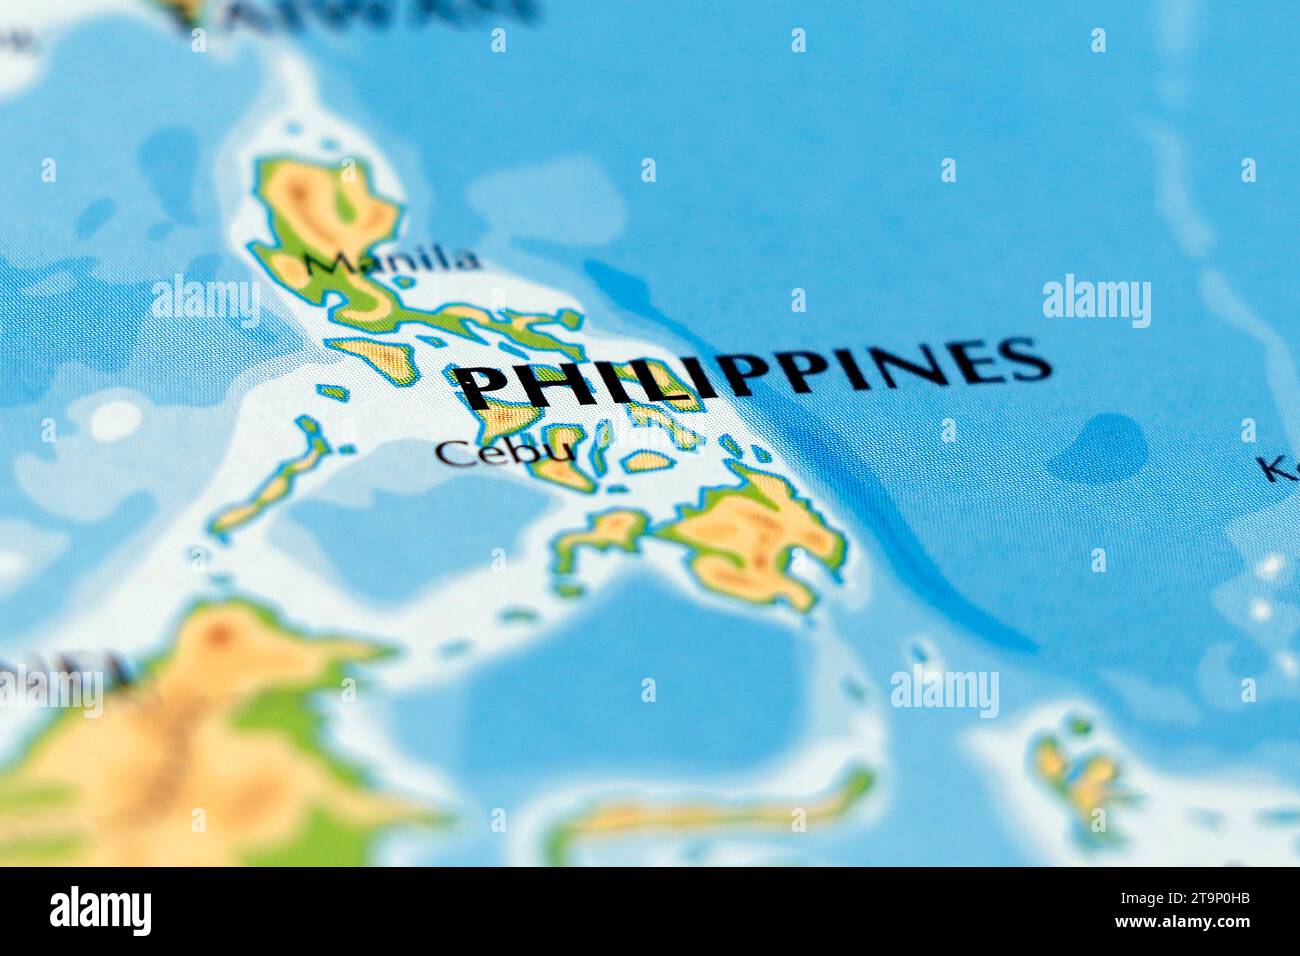 world map of asian country philippines, manila and cebu cities in close up Stock Photo